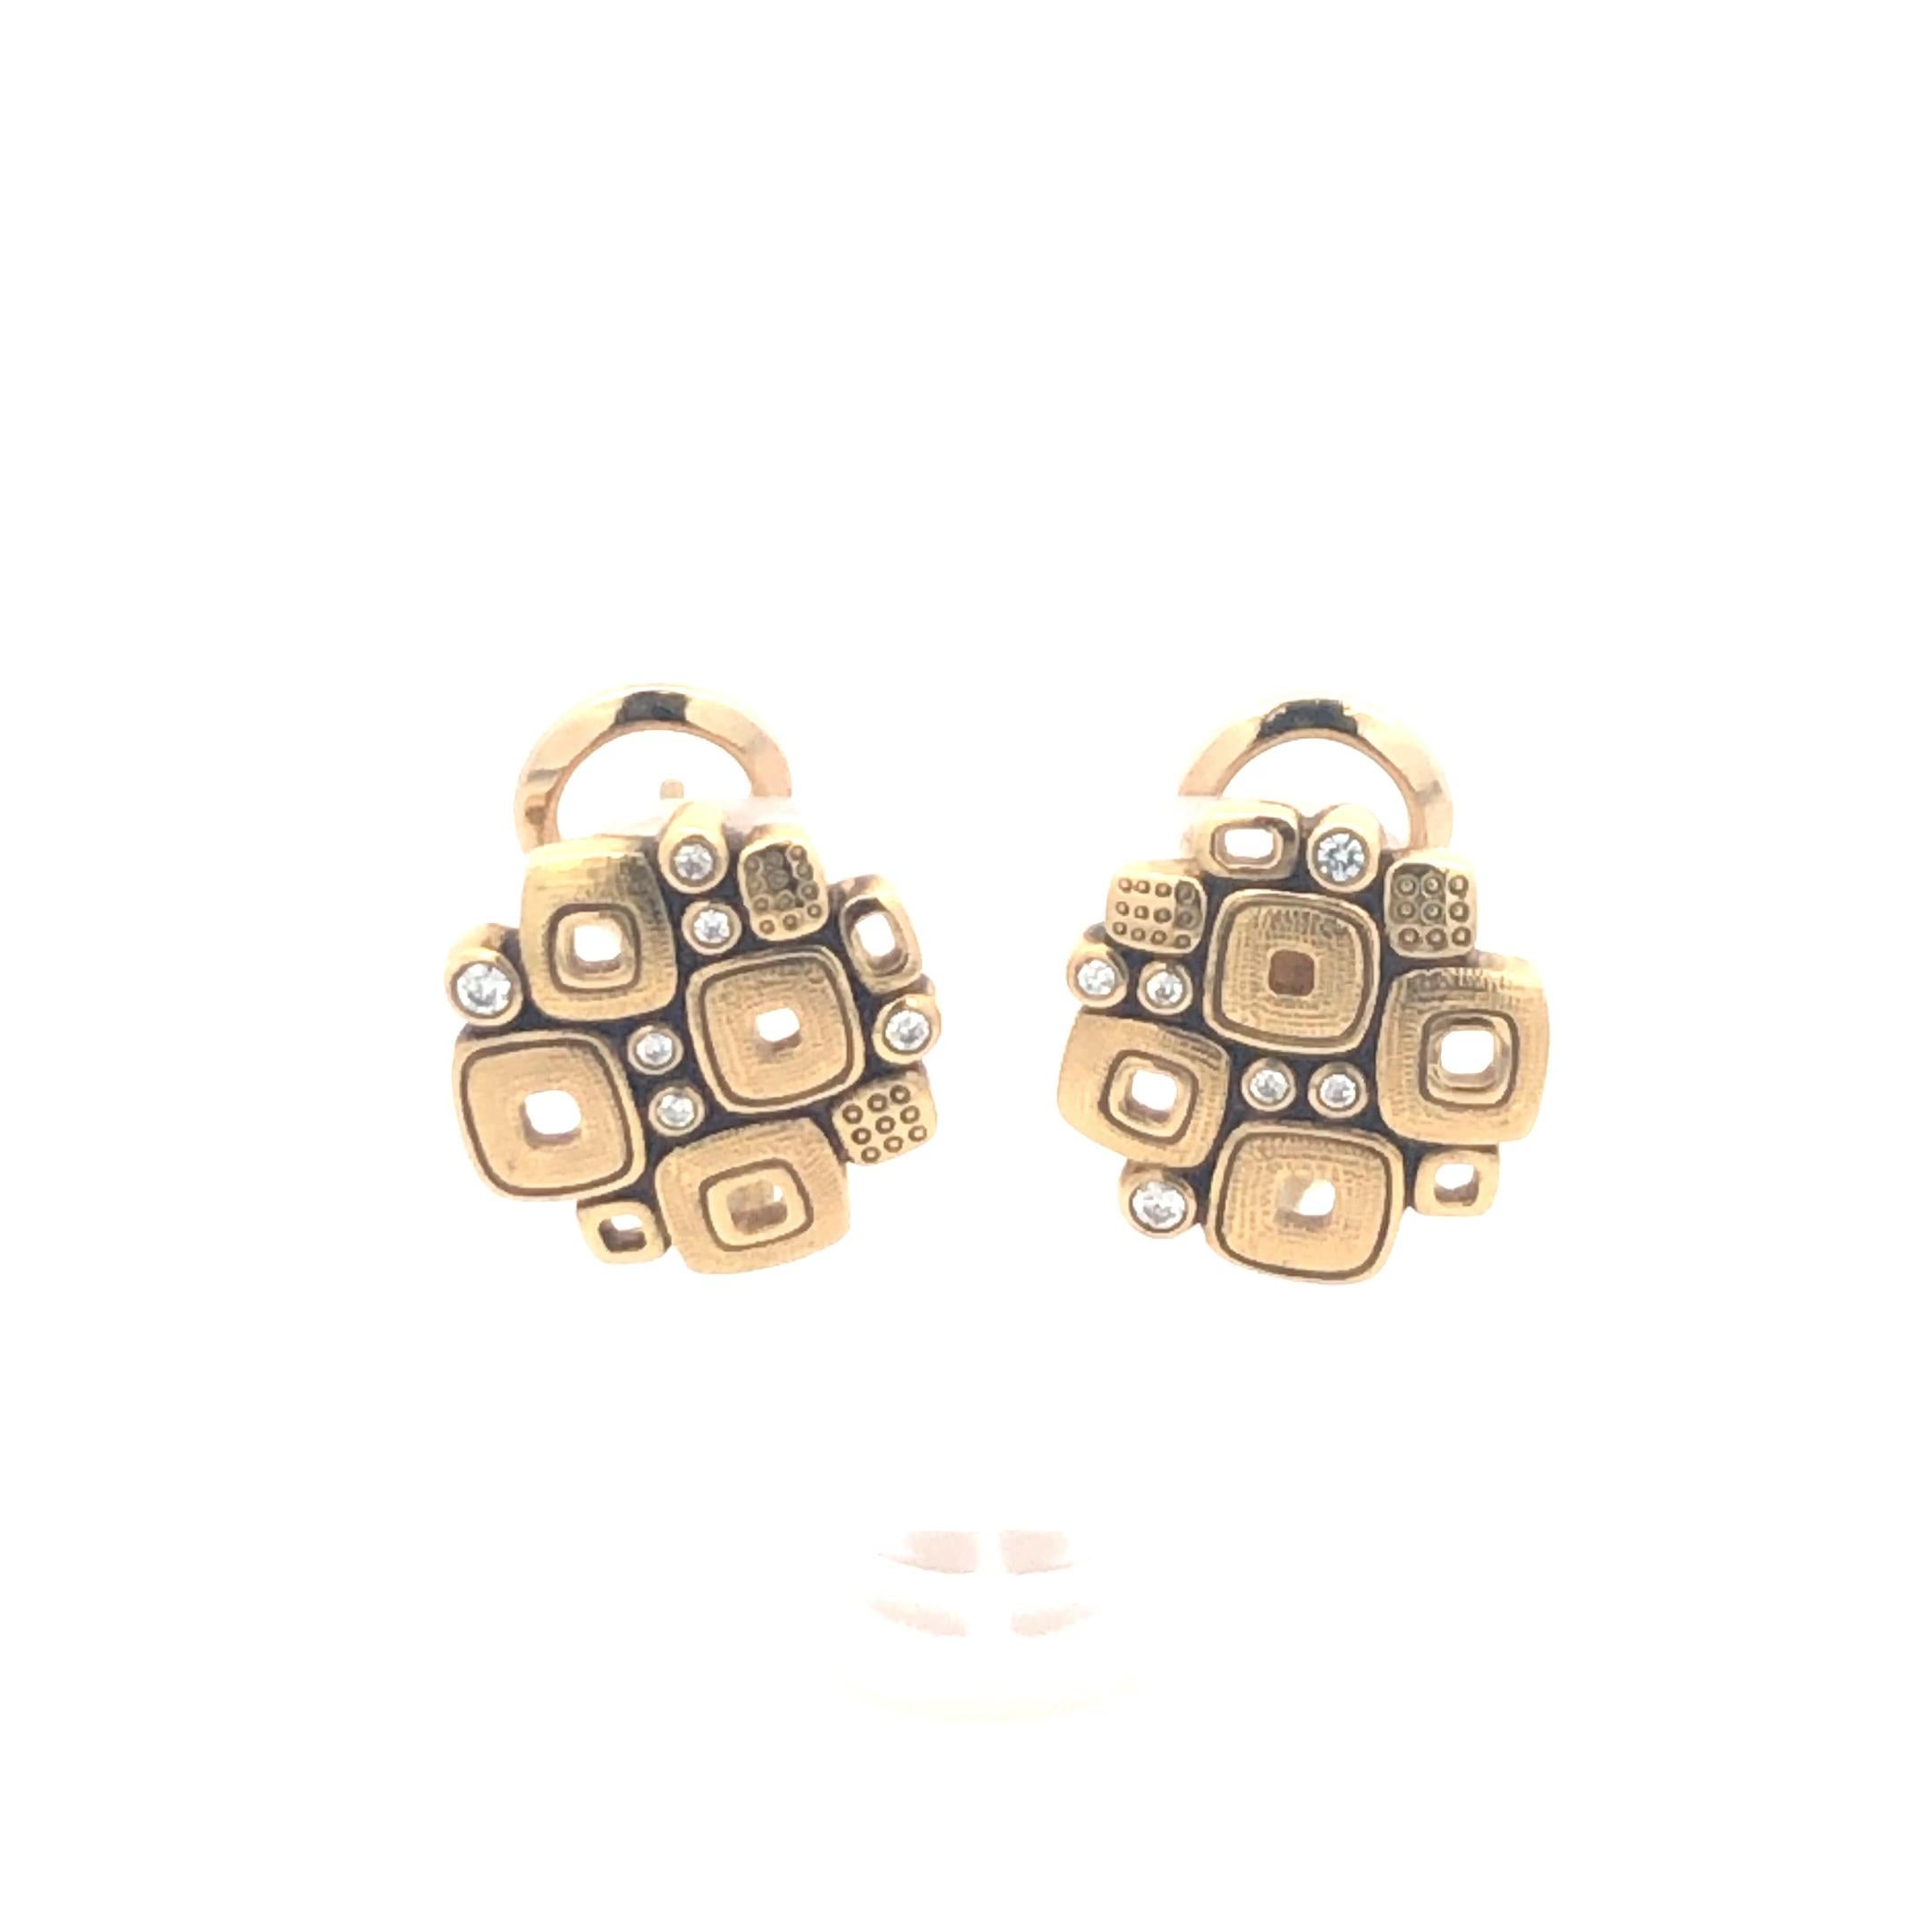 Alex Sepkus Little Windows Earrings.
The earrings features 12 round diamonds 0.15 carat total weigh. 18K Yellow Gold, 7.1 grams. 0.54 inch in diameter.